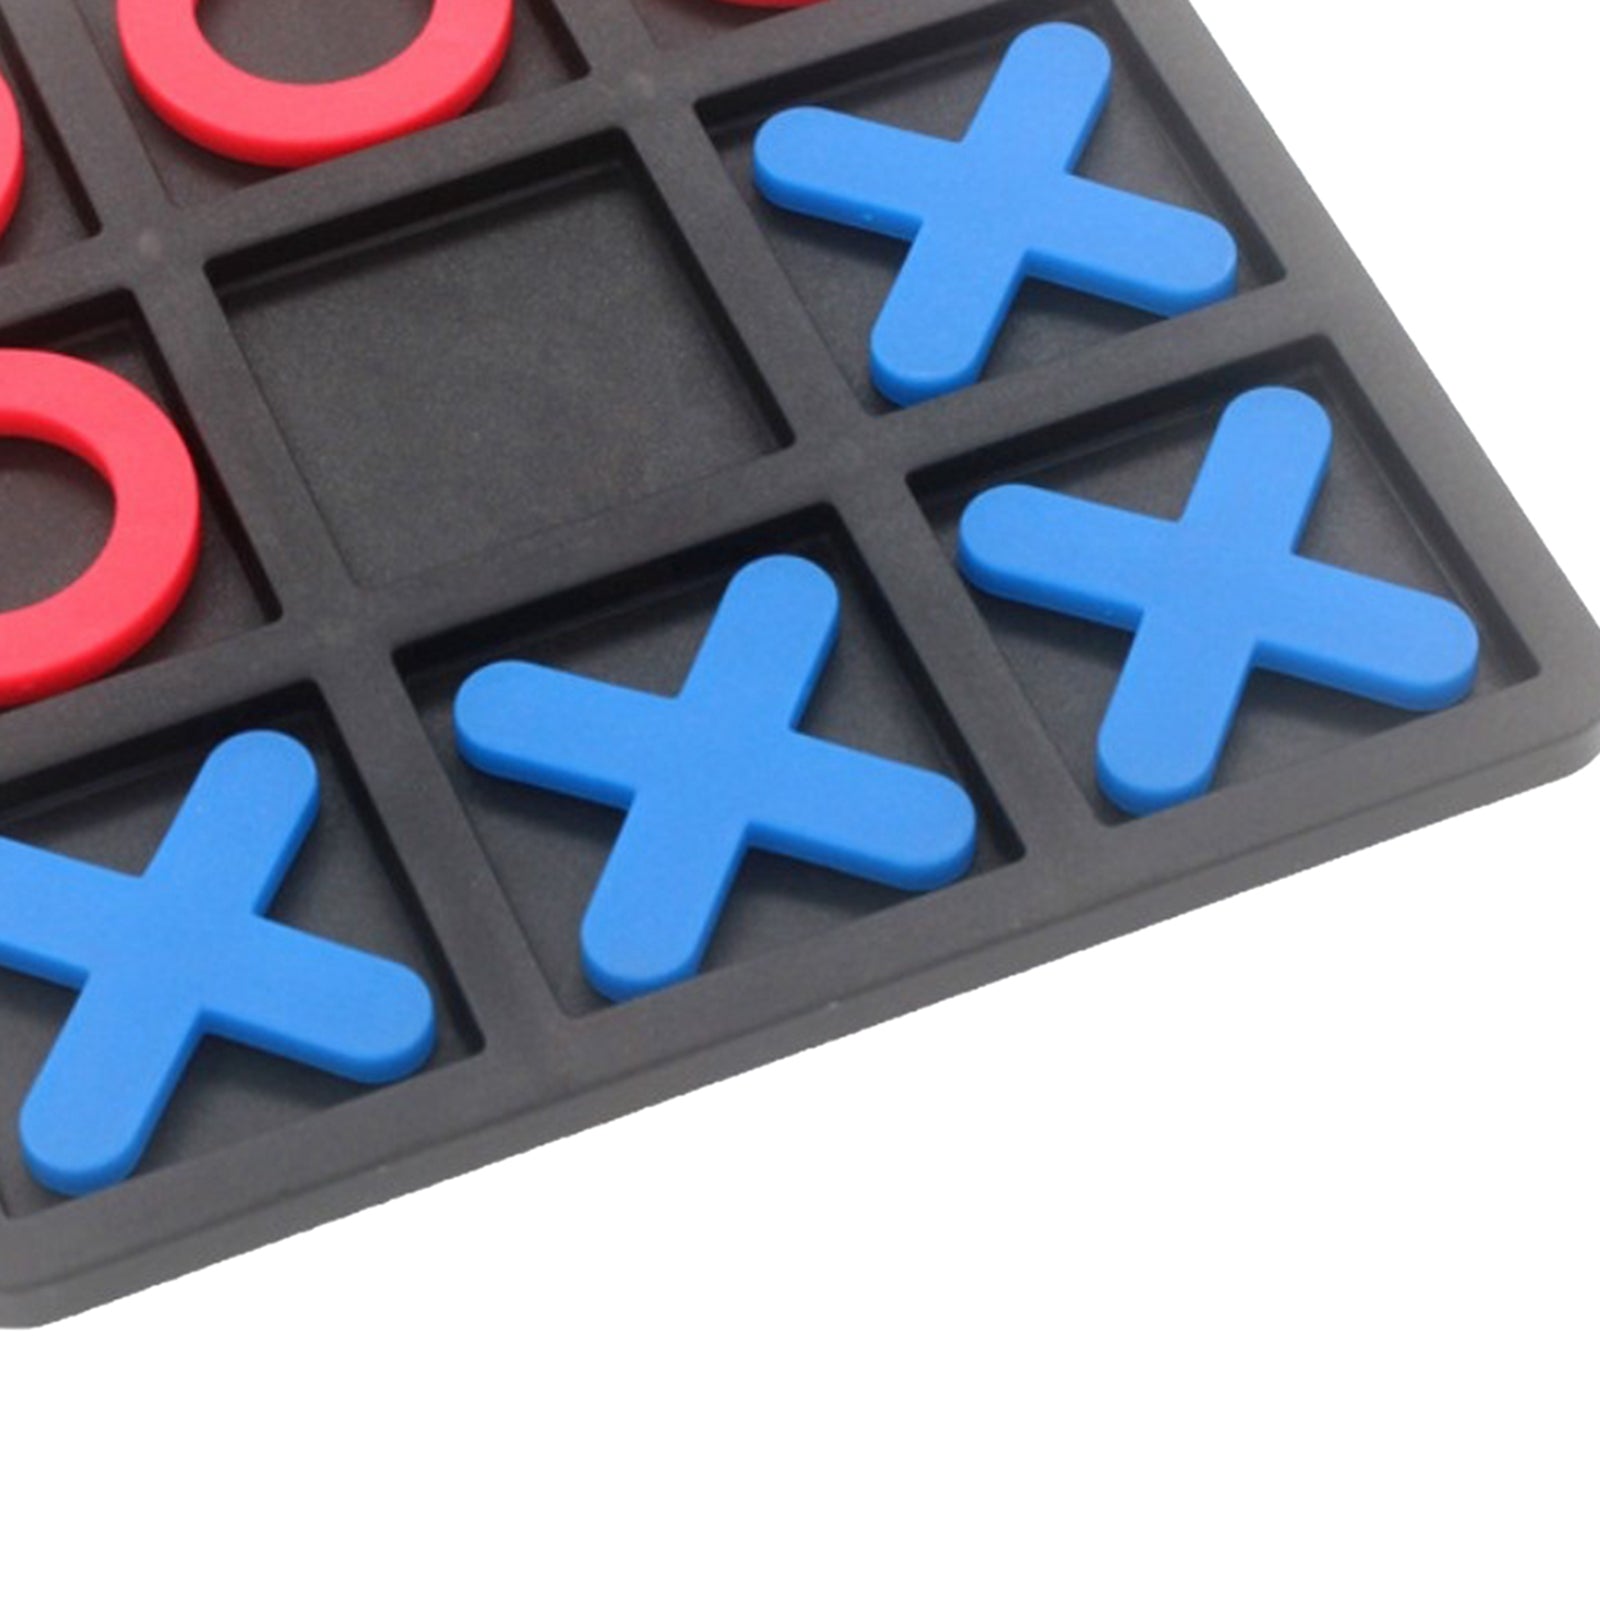 Mini Travel Games, Tic-Tac-Toe Game Puzzle Game Educational Toys For Kids